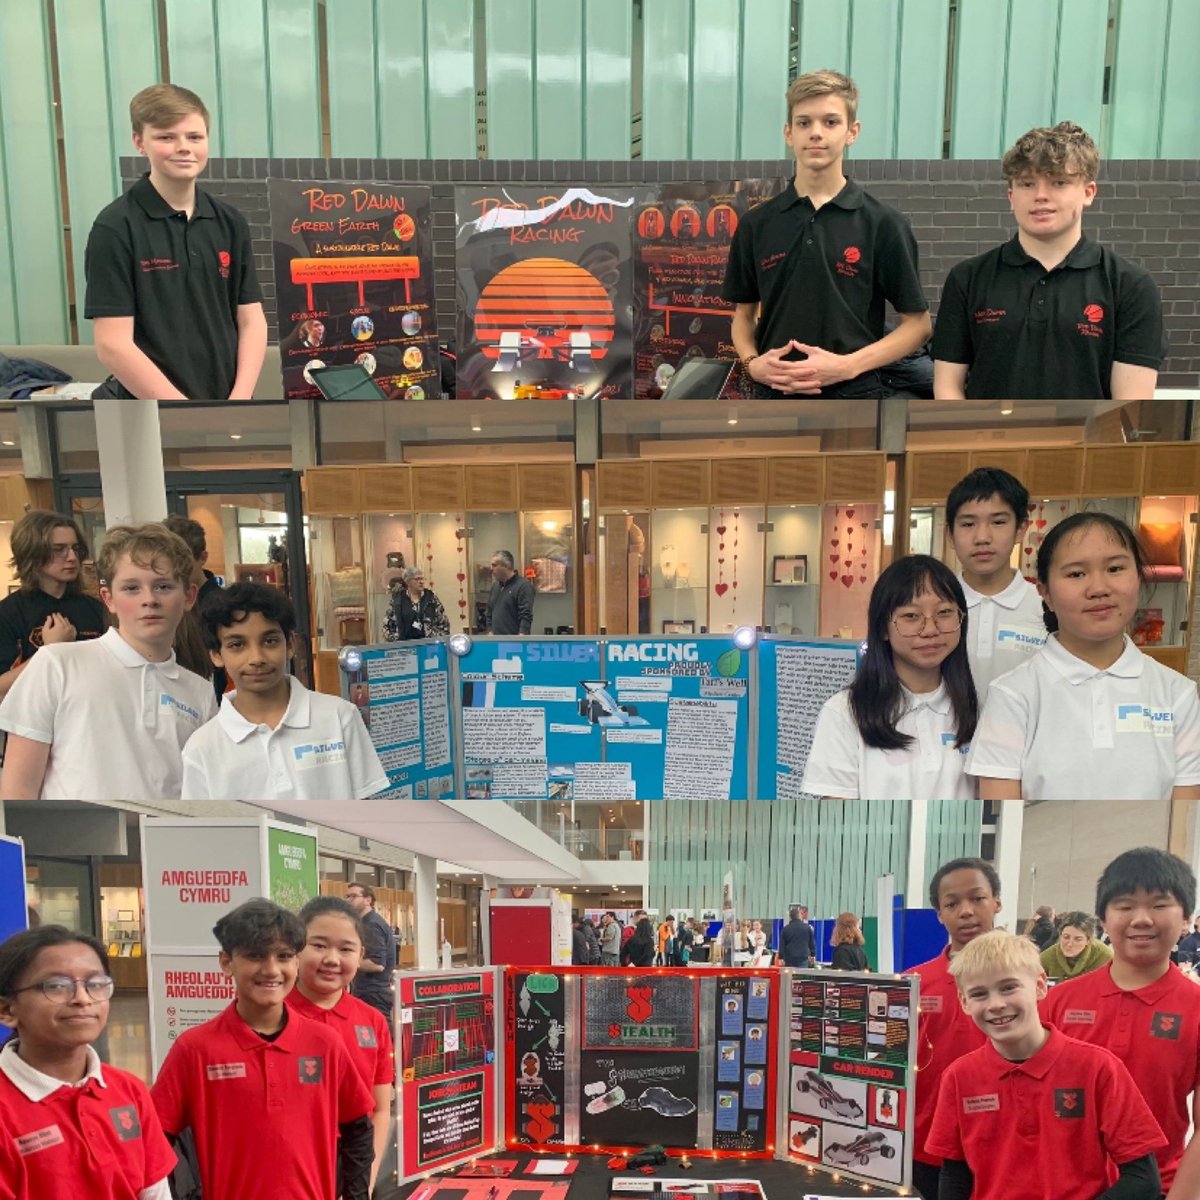 Our @f1inschoolsUK teams are all set up for the @EESWSTEMCymru South Wales Regionals. Good luck @red_dawn_racing @Silver_Racing47 and #Stealth Enjoy the experience! #SJCDT #SJCF1inSchools #SJCSeniors